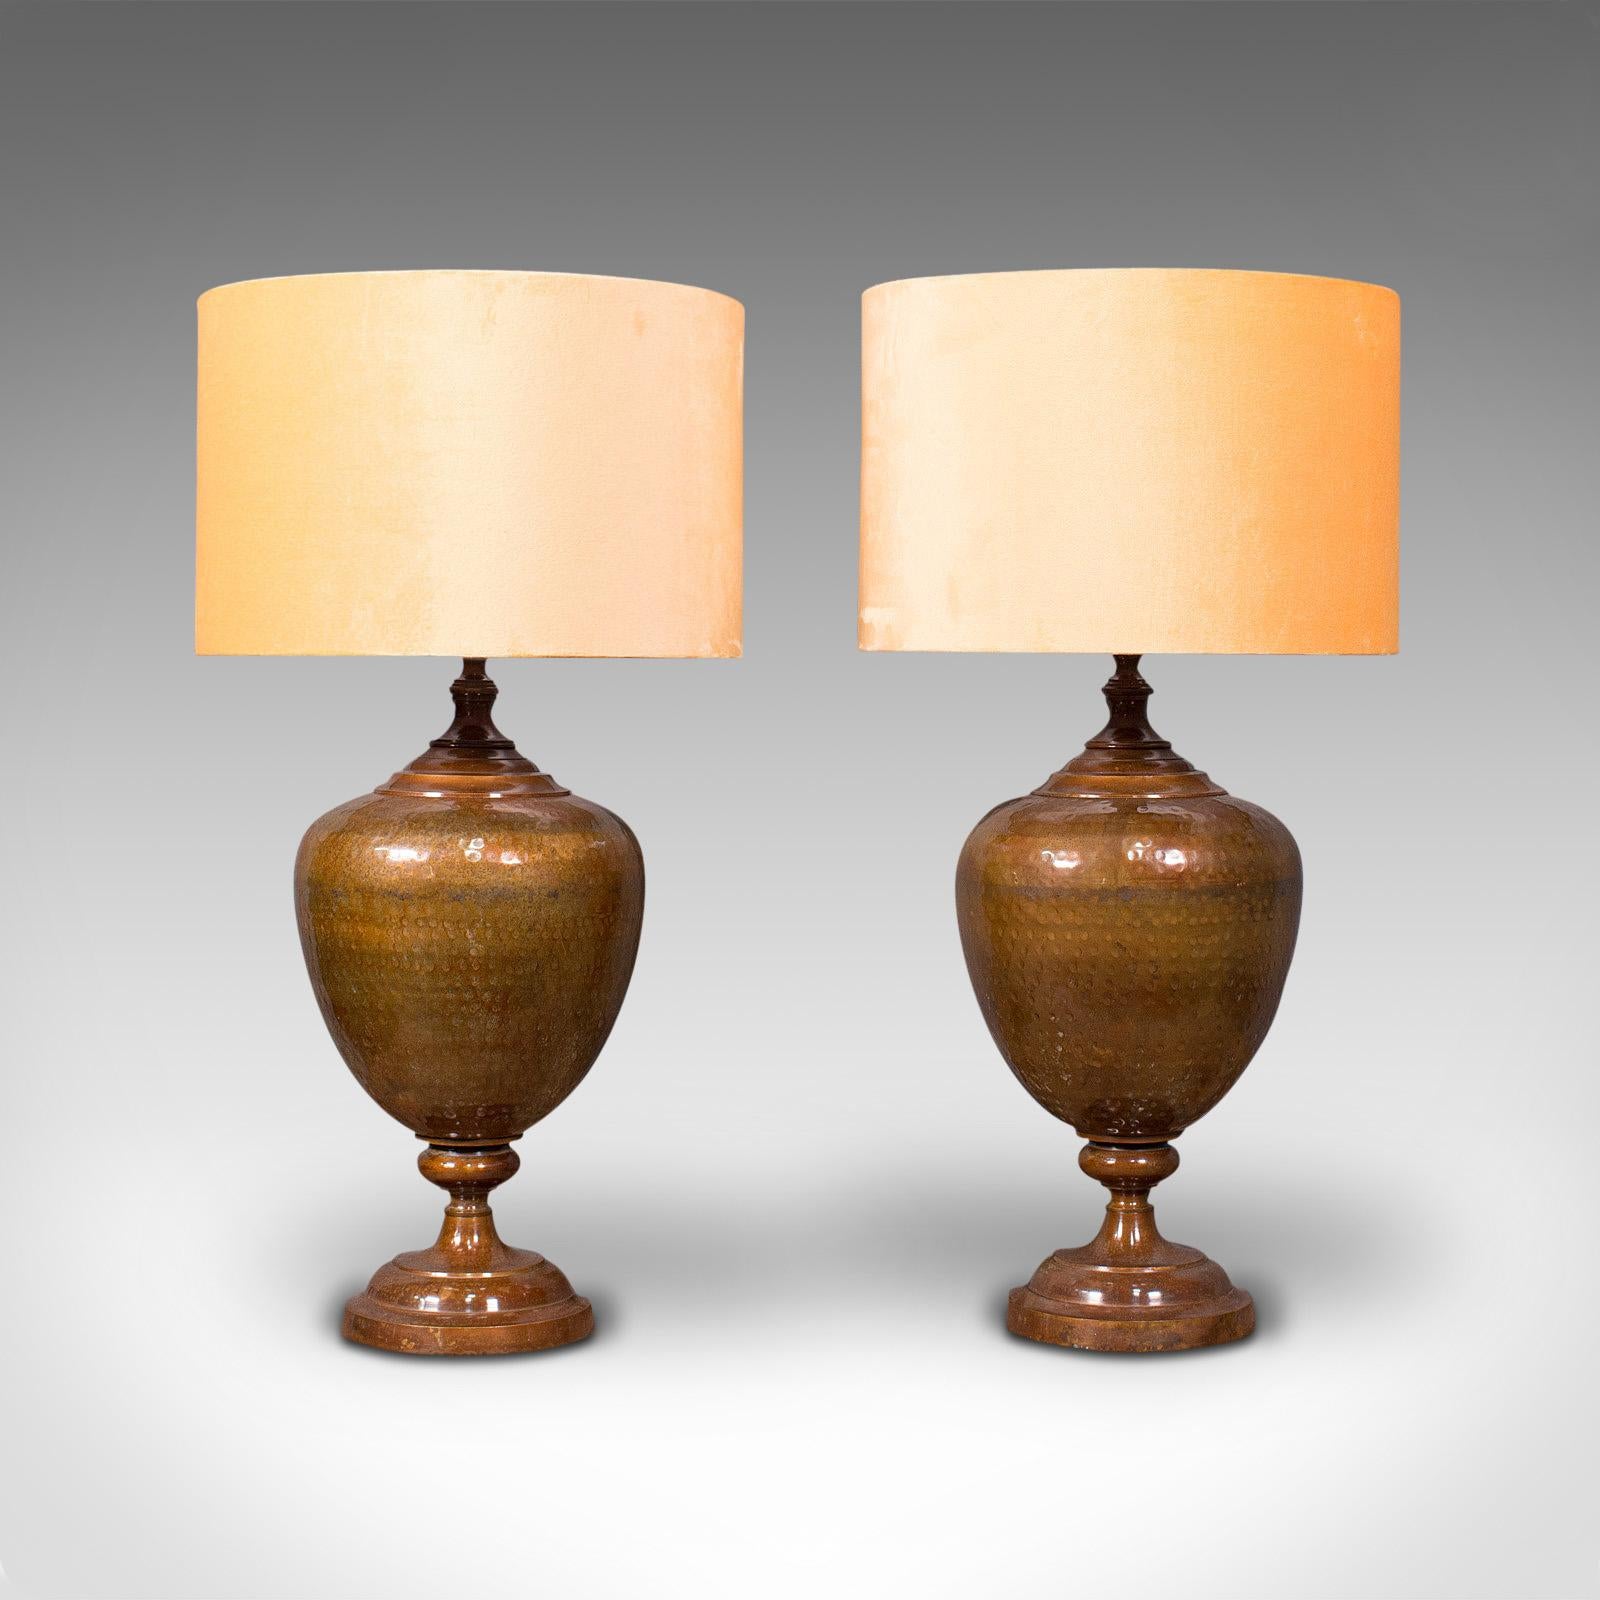 British Pair of Vintage Table Lamps, English, Brass, Decorative, Side Light, Circa 1940